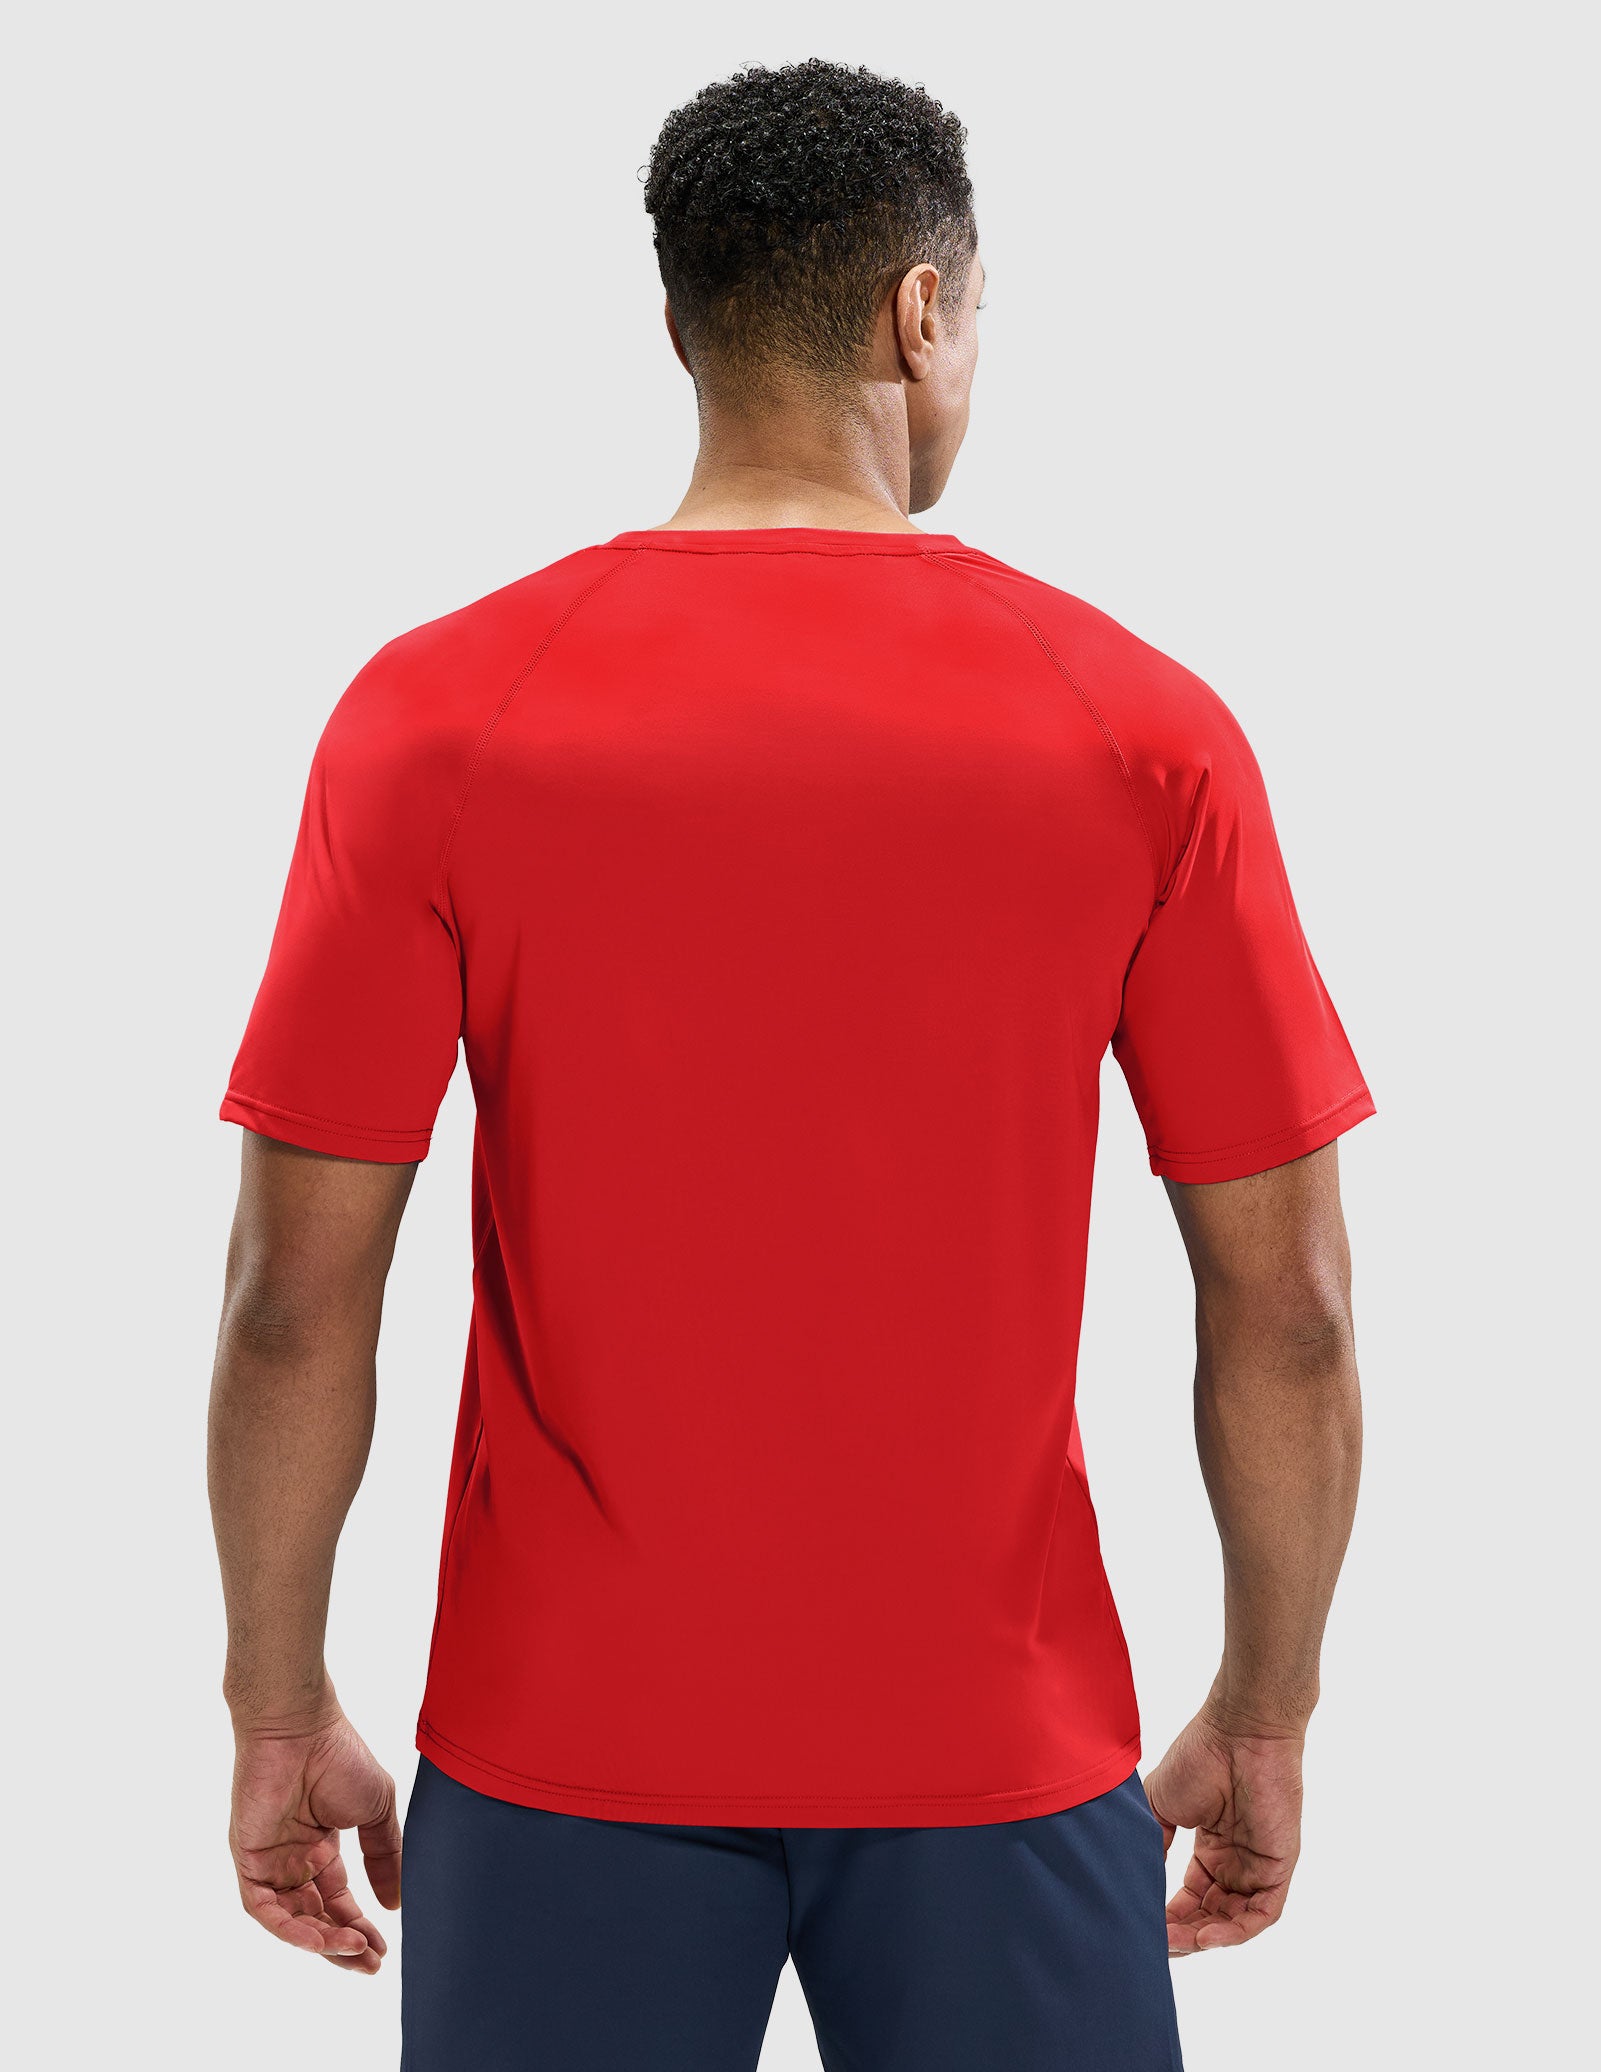 Men's Workout T-Shirts Dry Fit Athletic Running Tee